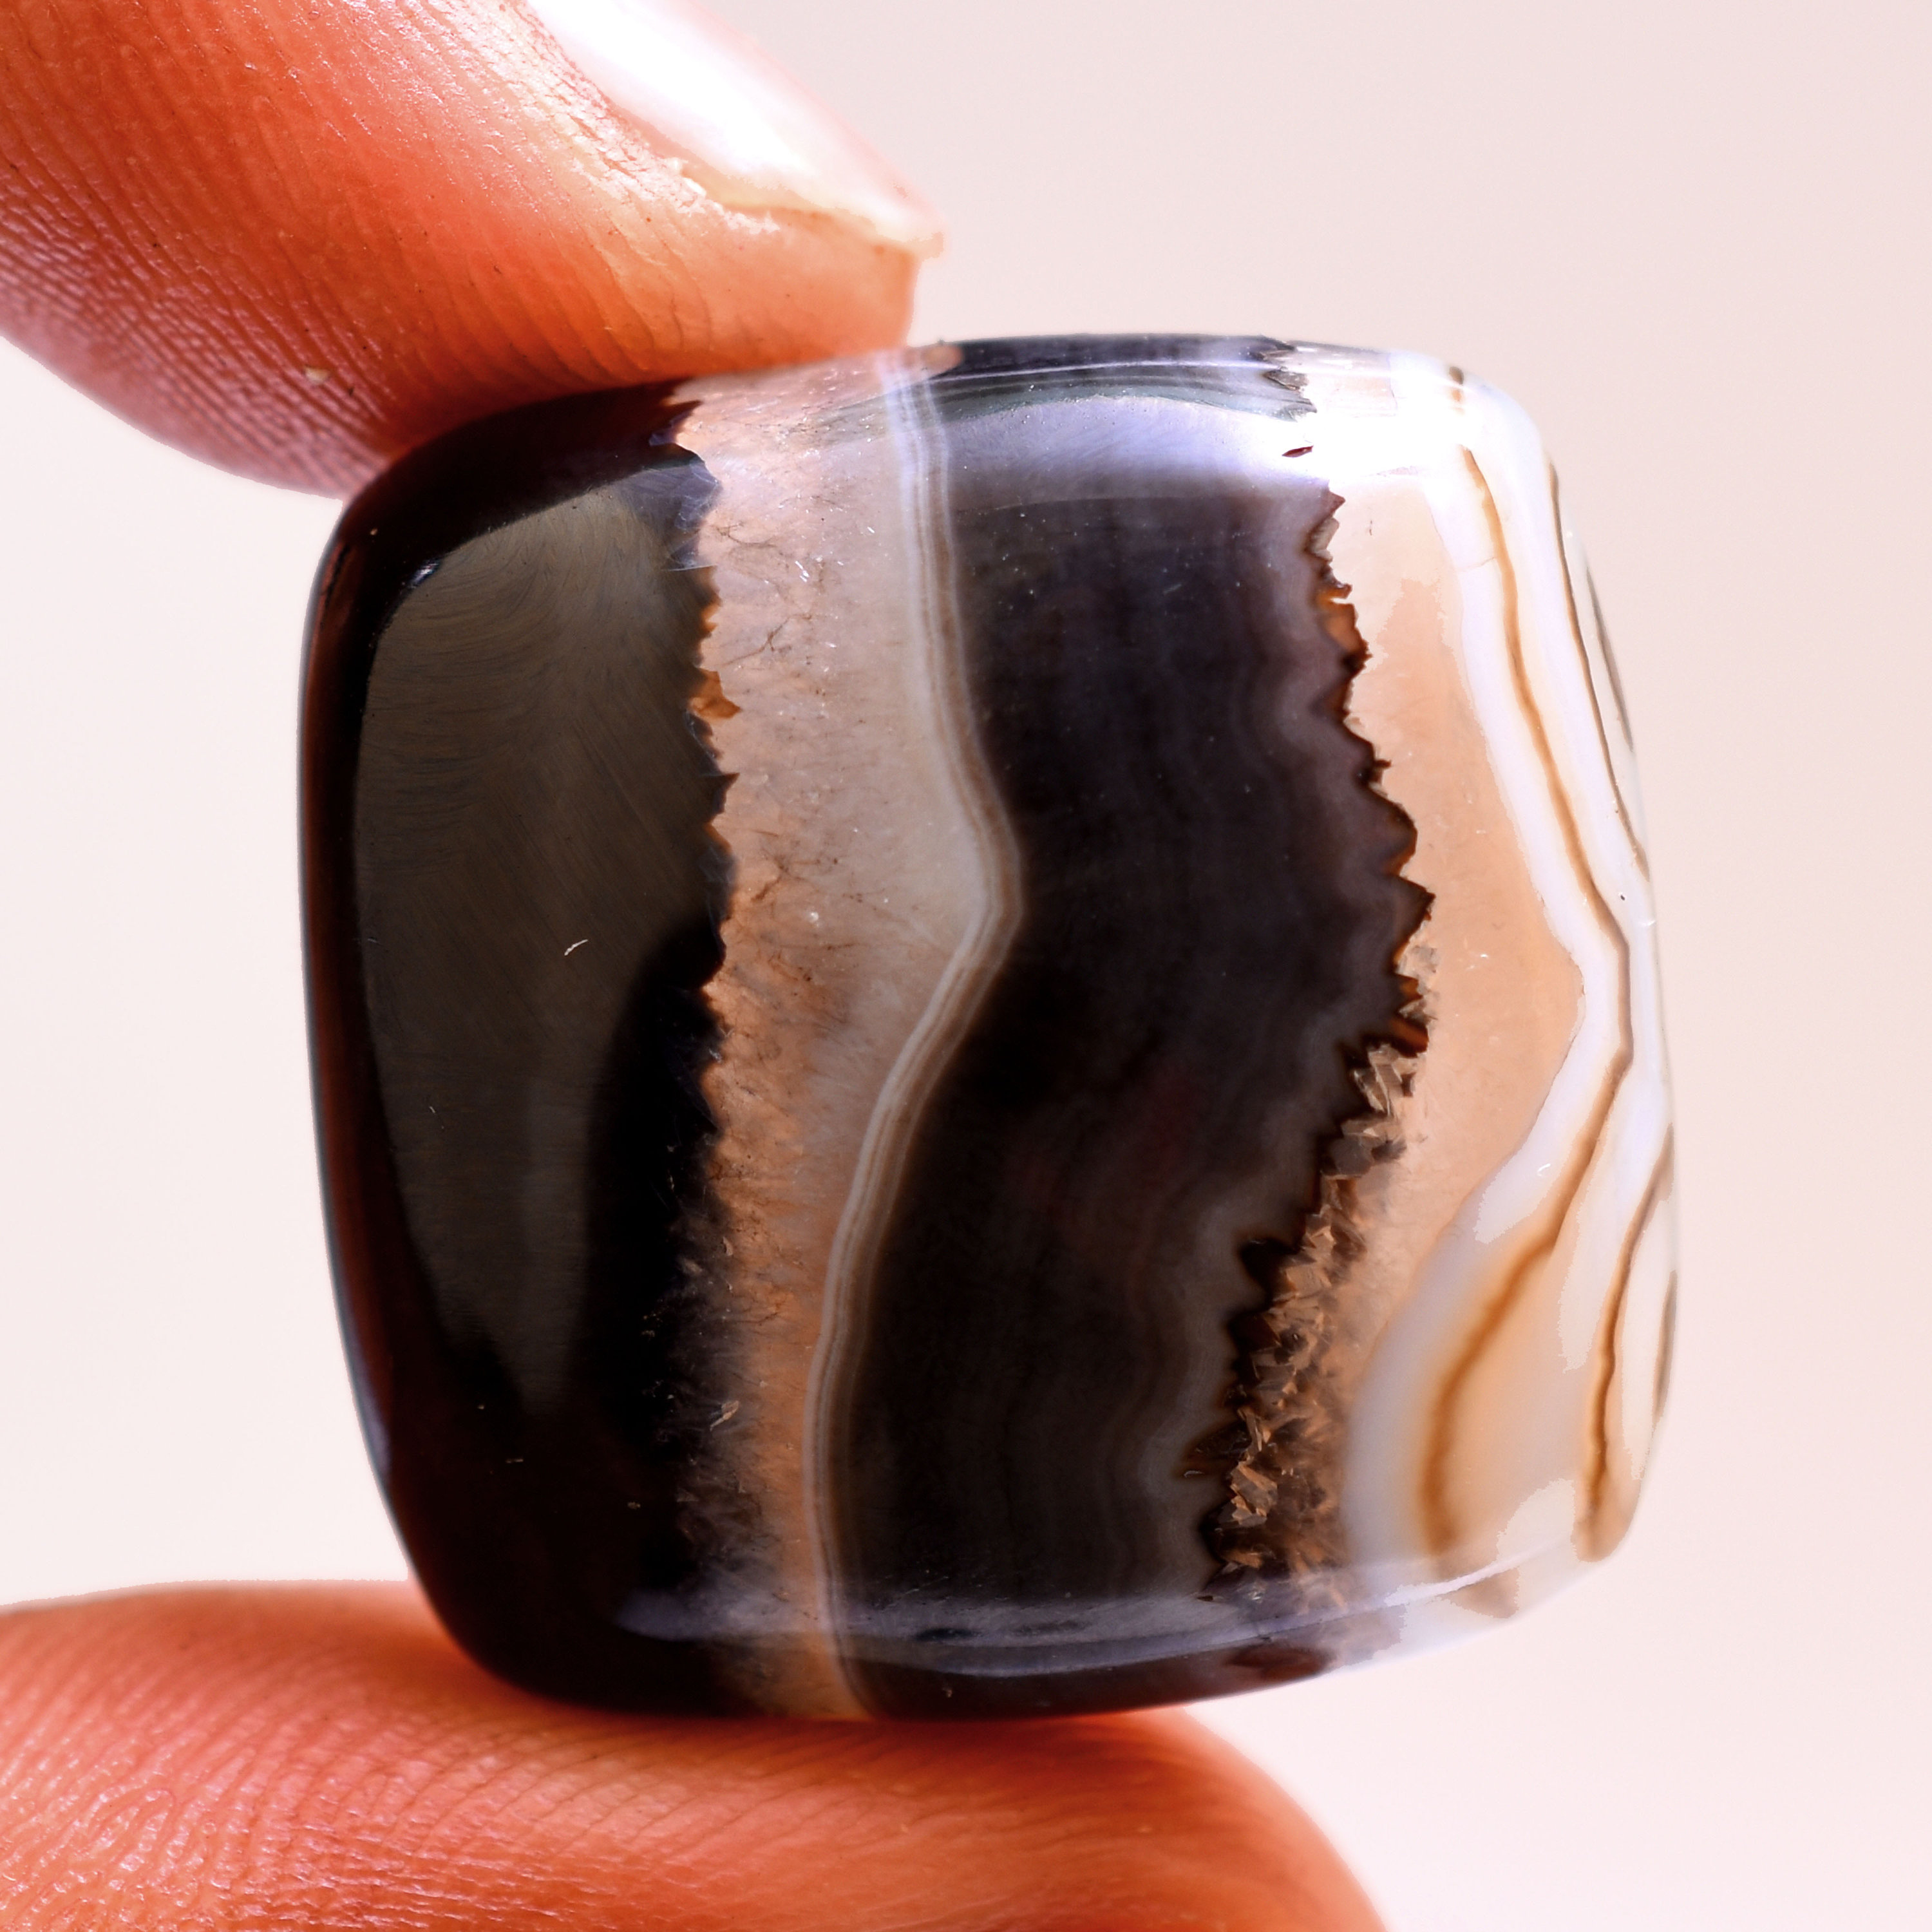 30 Cts Black Banded Agate Gemstone Natural Banded Agate Cabochon Amazing Handcraft Semi Precious Loose Stone Sulemani Hakik 31x20x5mm